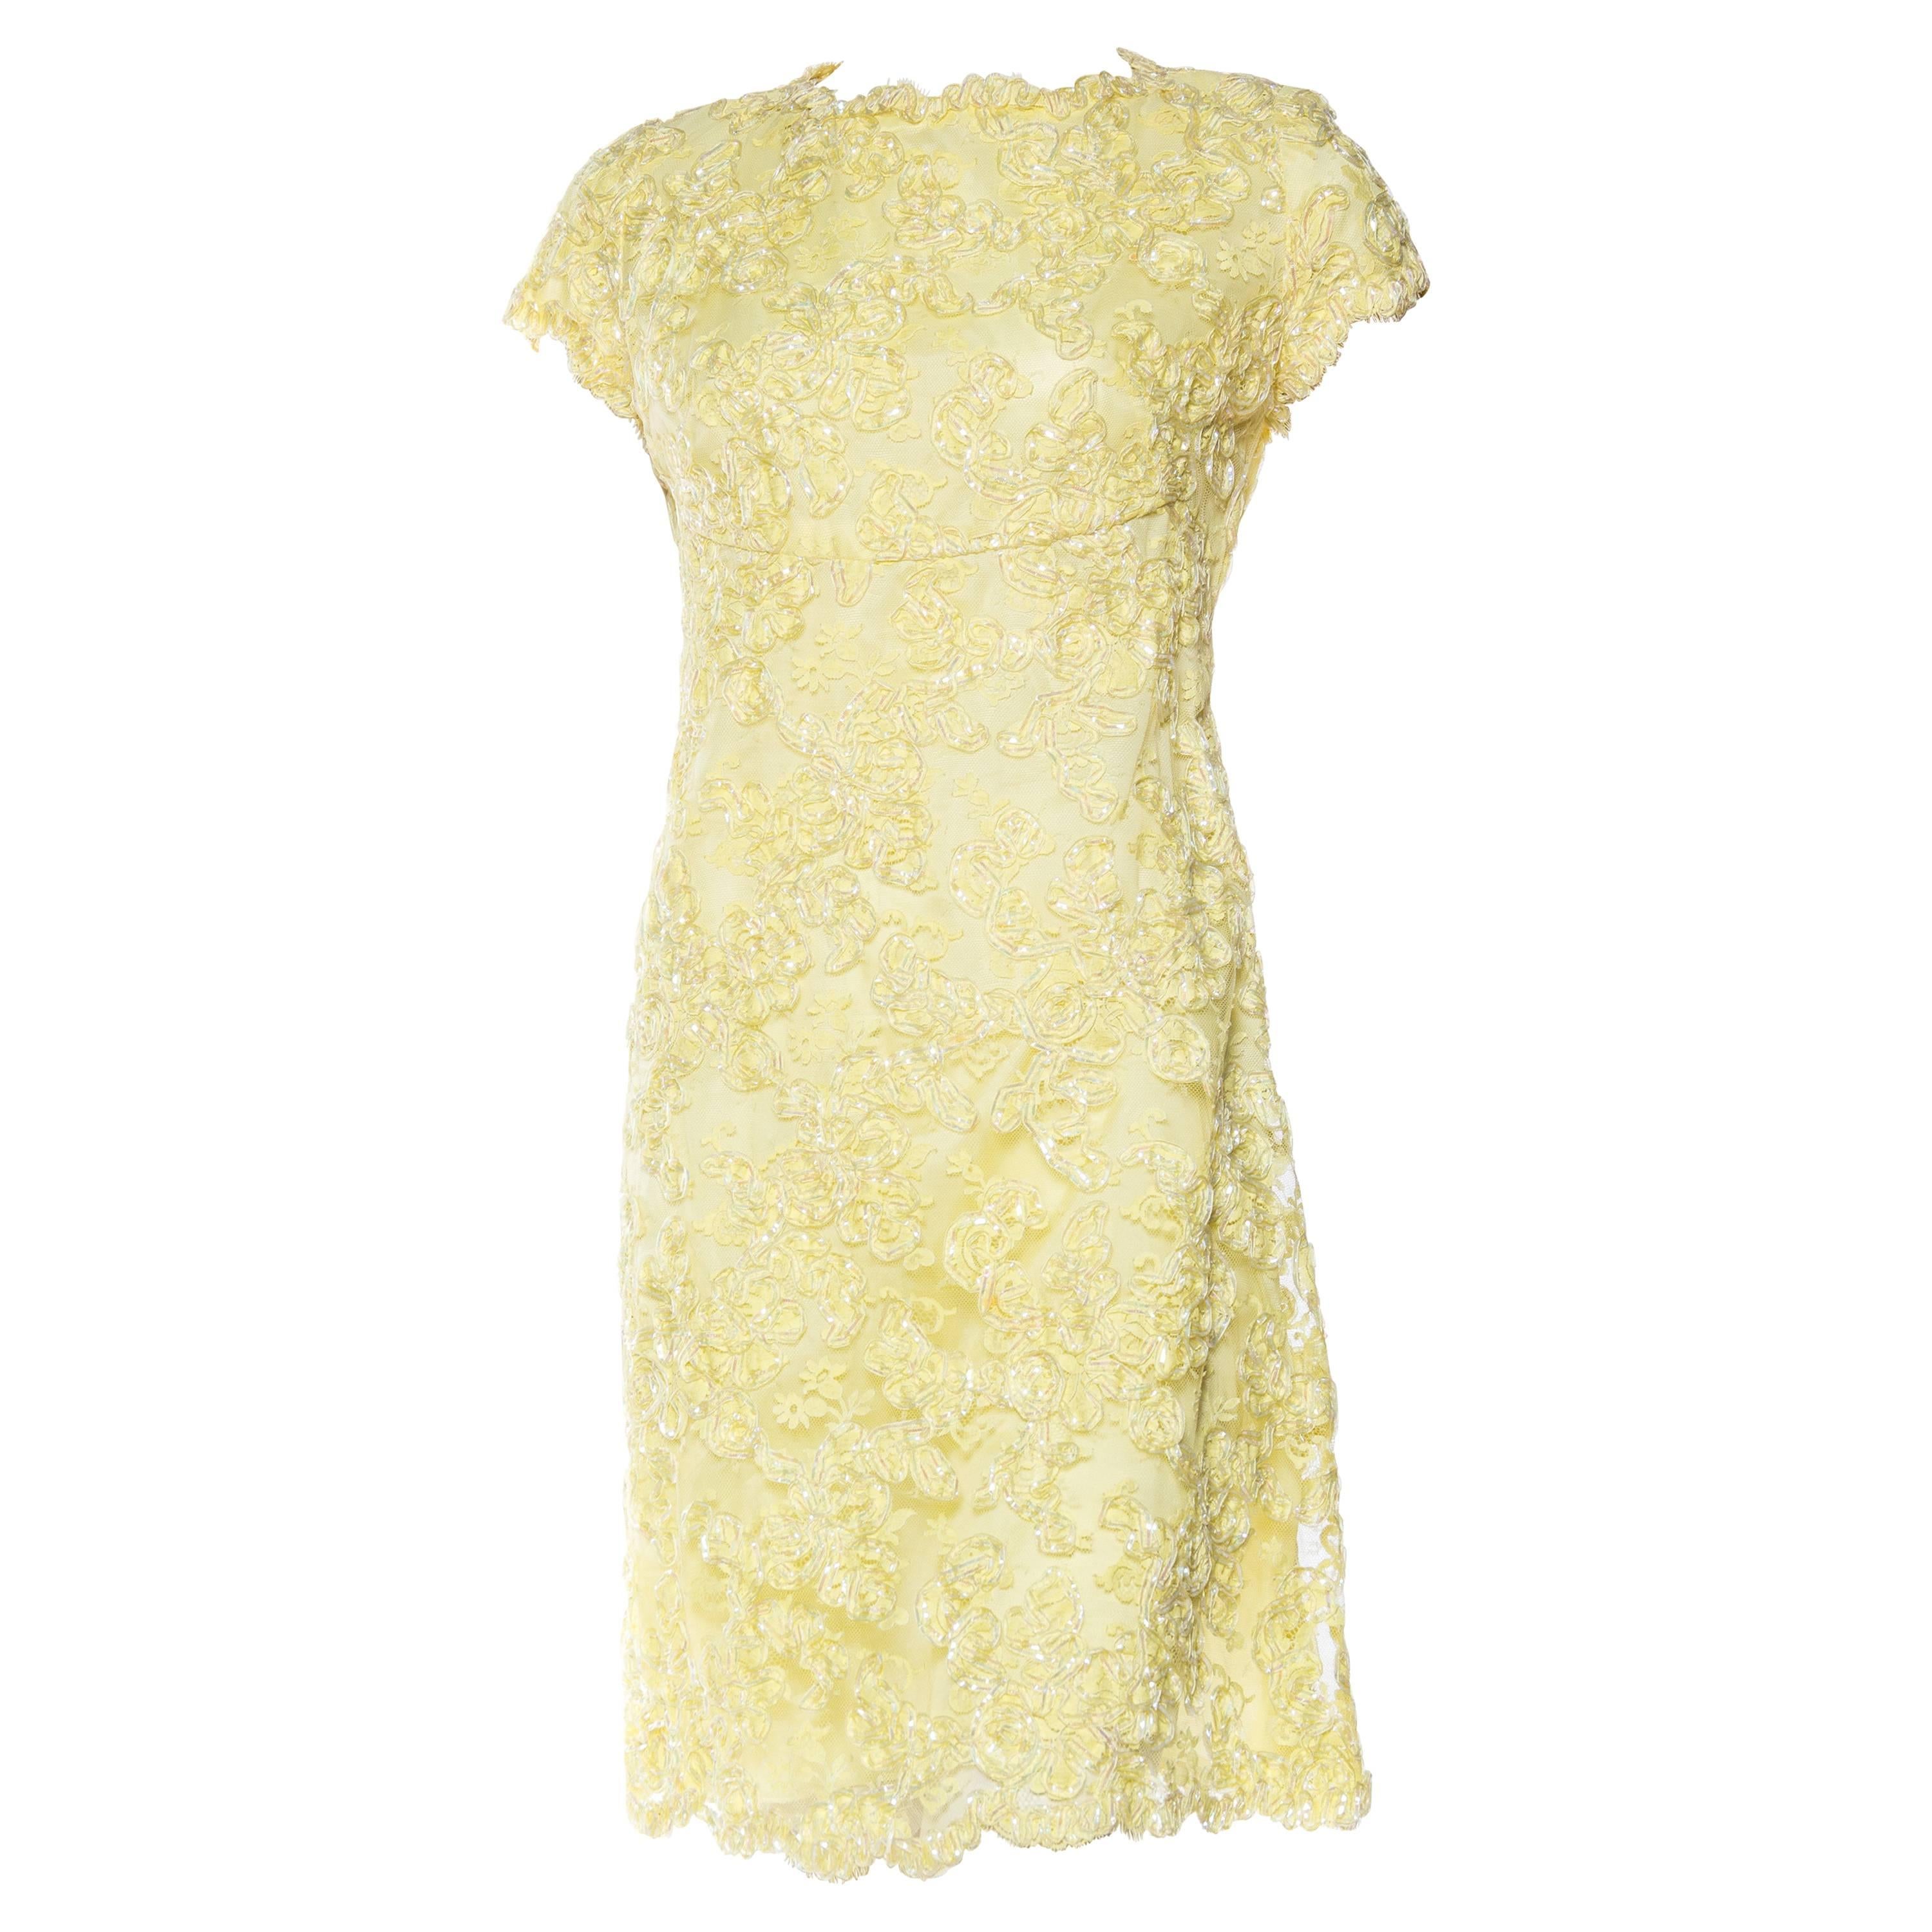 Fun 1960s Lurex Embroidered Lace Dress